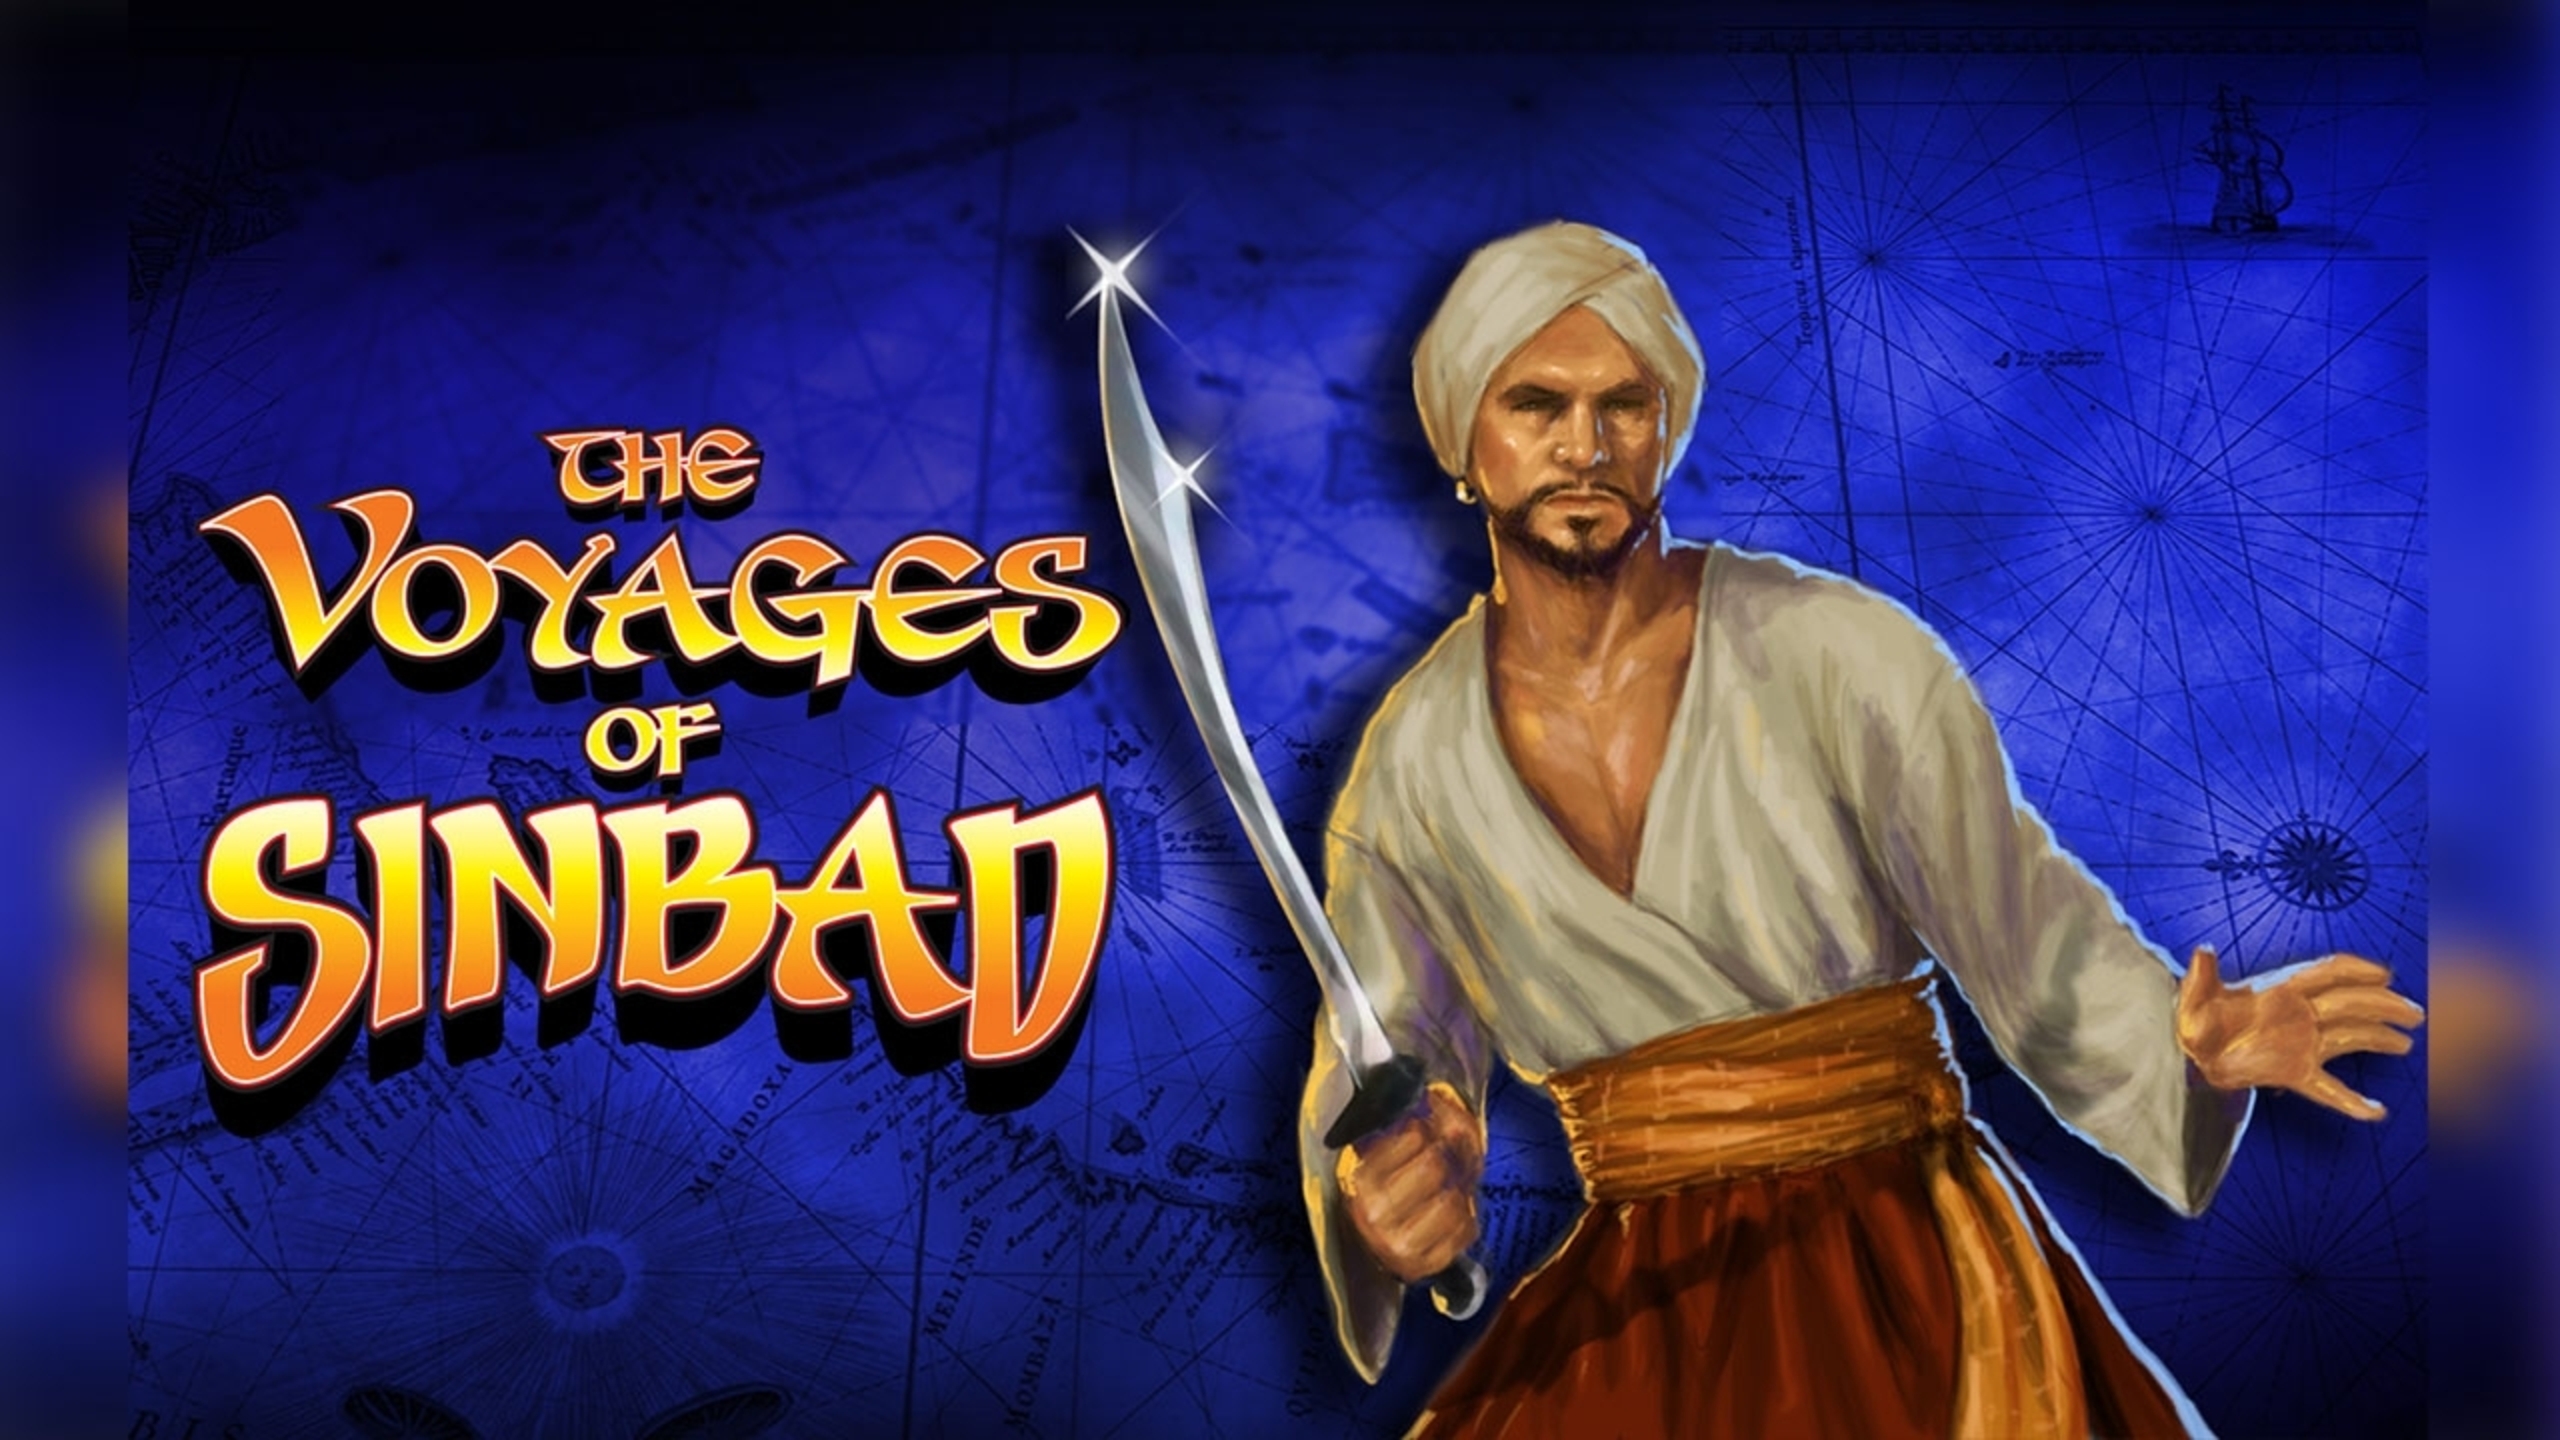 The The voyages of Sinbad Online Slot Demo Game by 2 By 2 Gaming